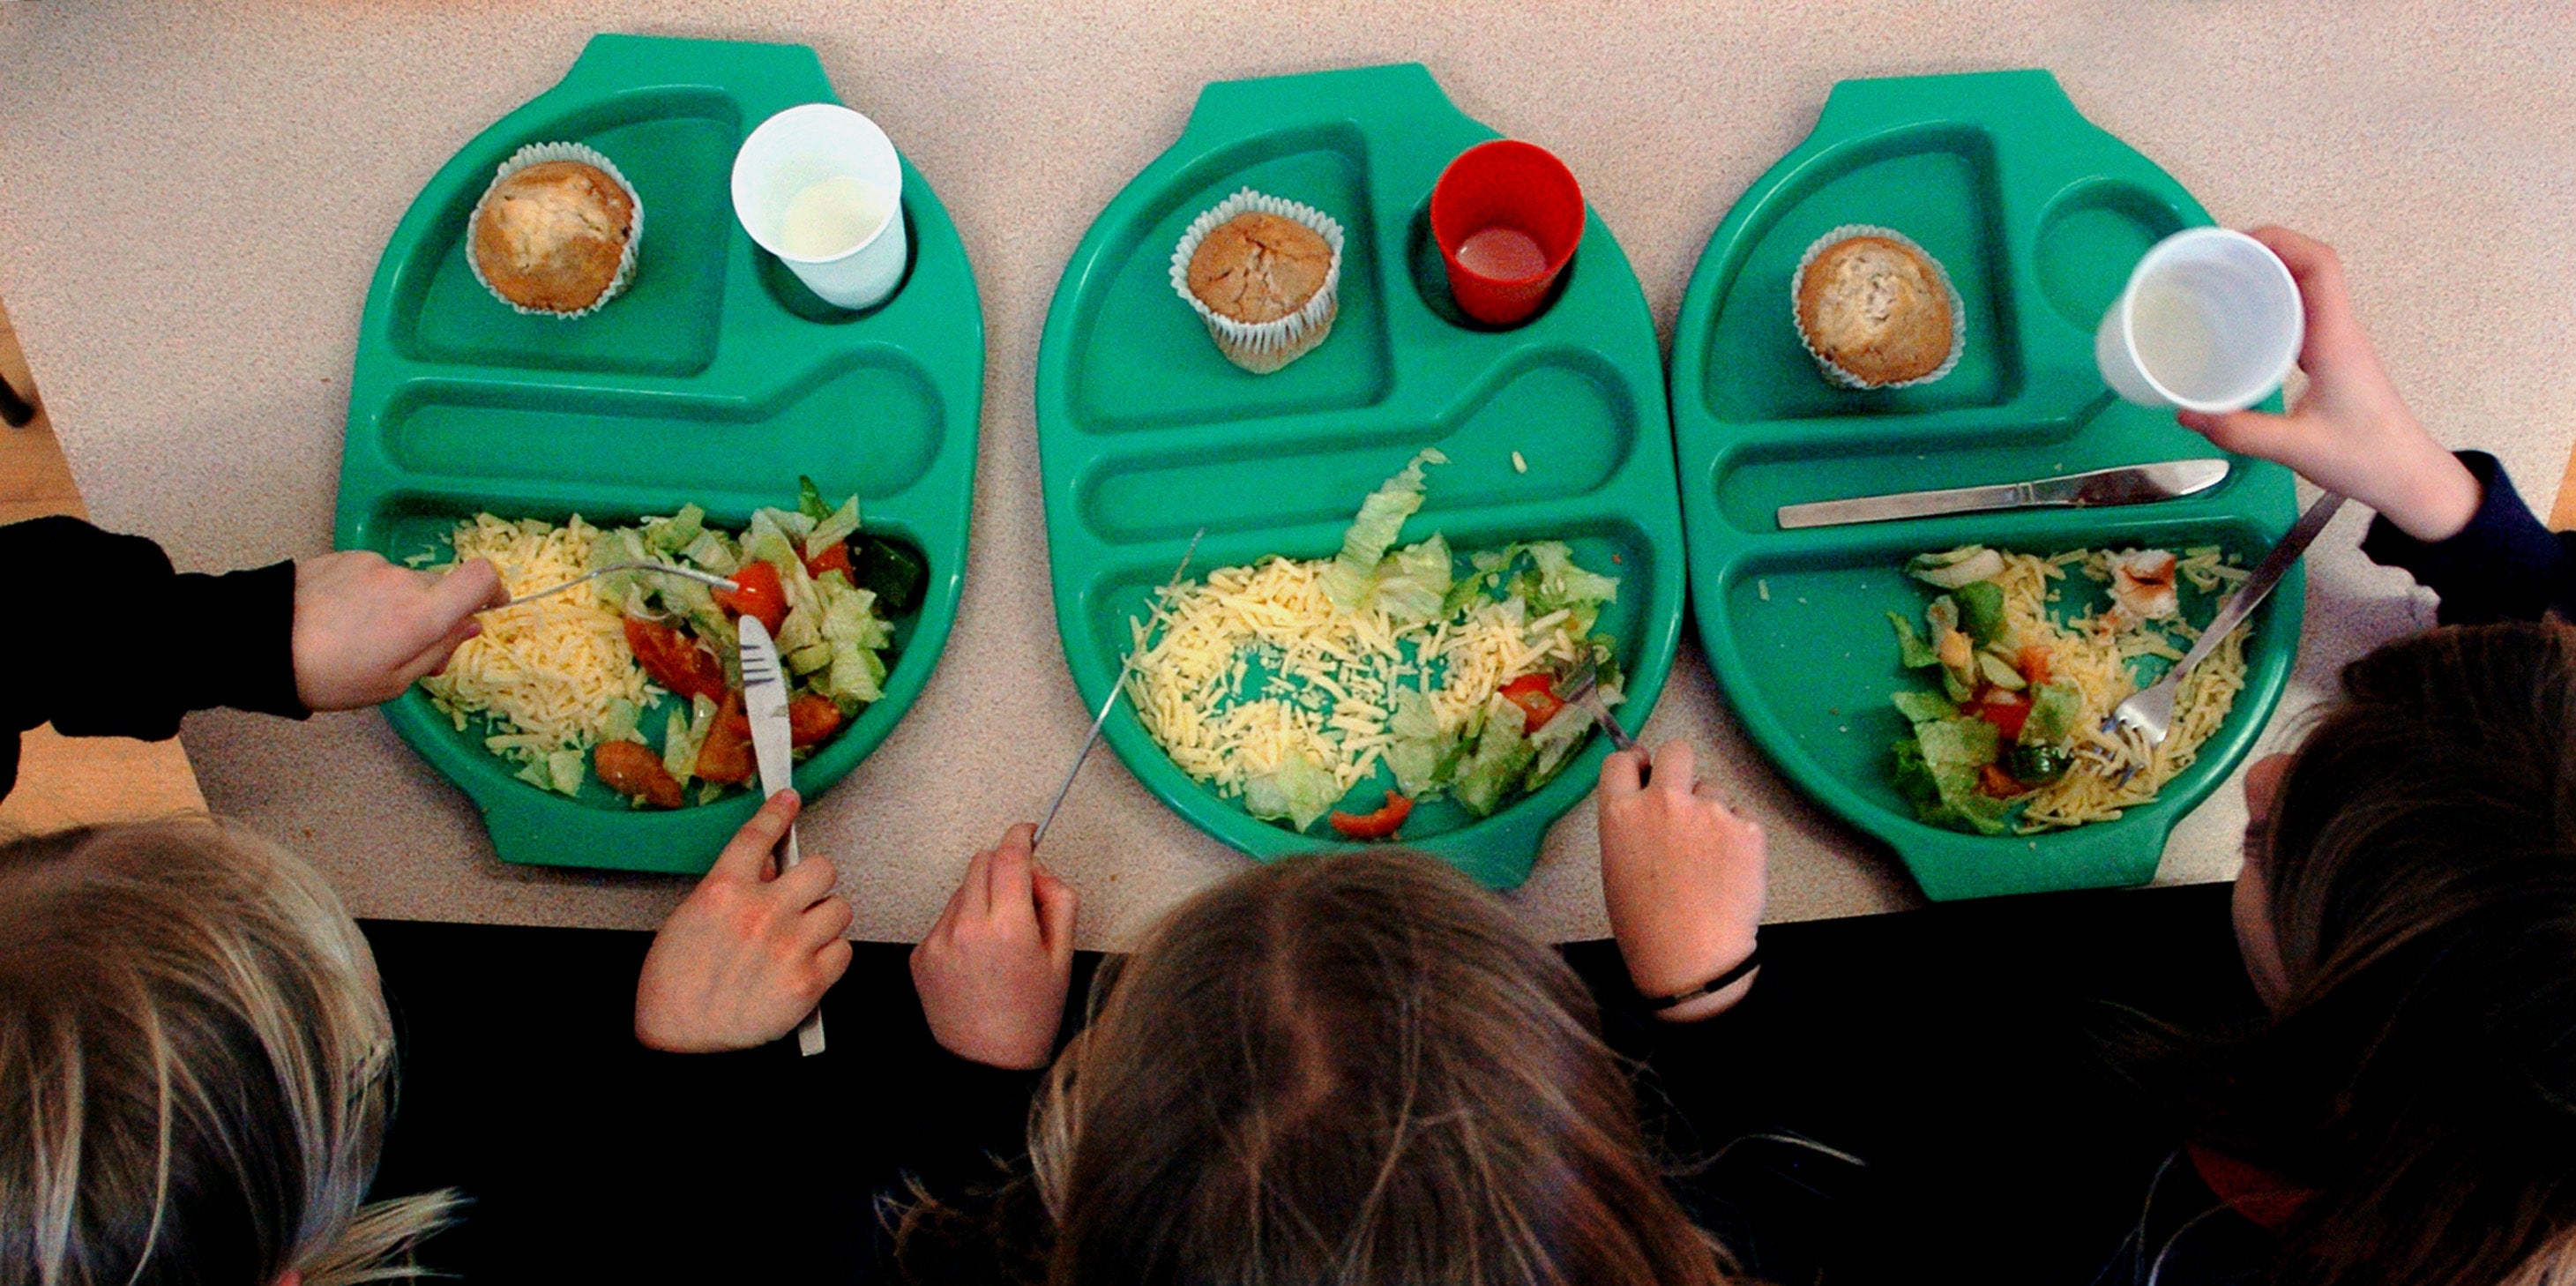 One headteacher says the situation with school food is ‘challenging’